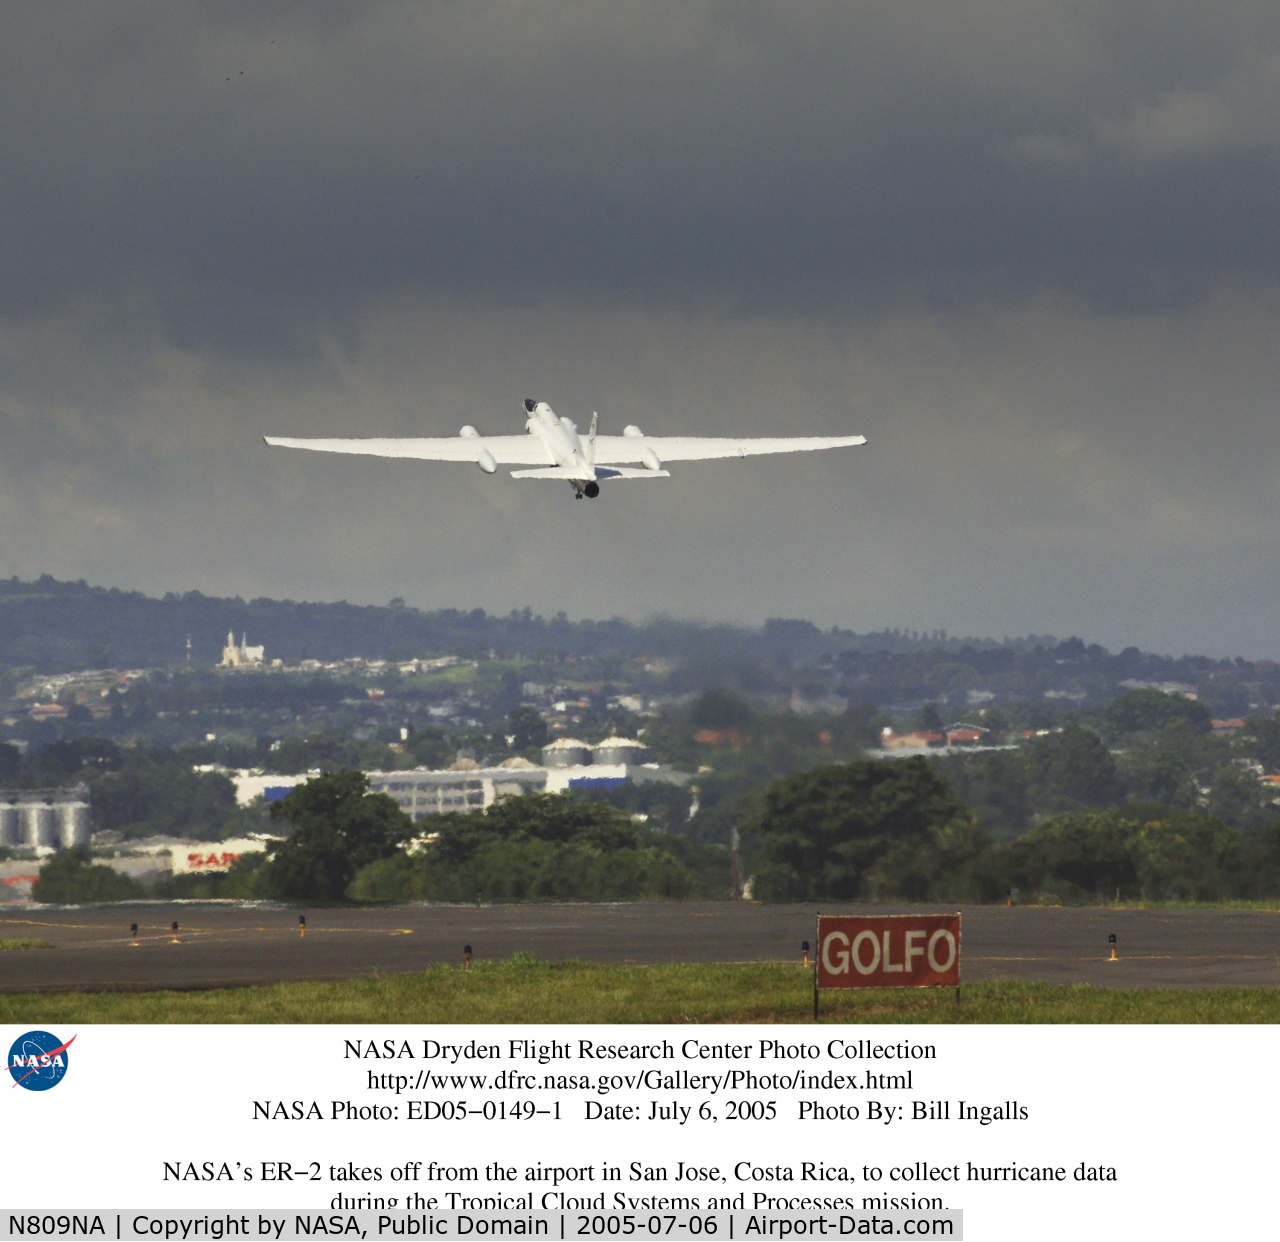 N809NA, 1980 Lockheed ER-2 C/N 80-1097 (Article 097), NASA's ER-2 takes off from the airport in San Jose, Costa Rica, to collect hurricane data during the Tropical Cloud Systems and Processes mission